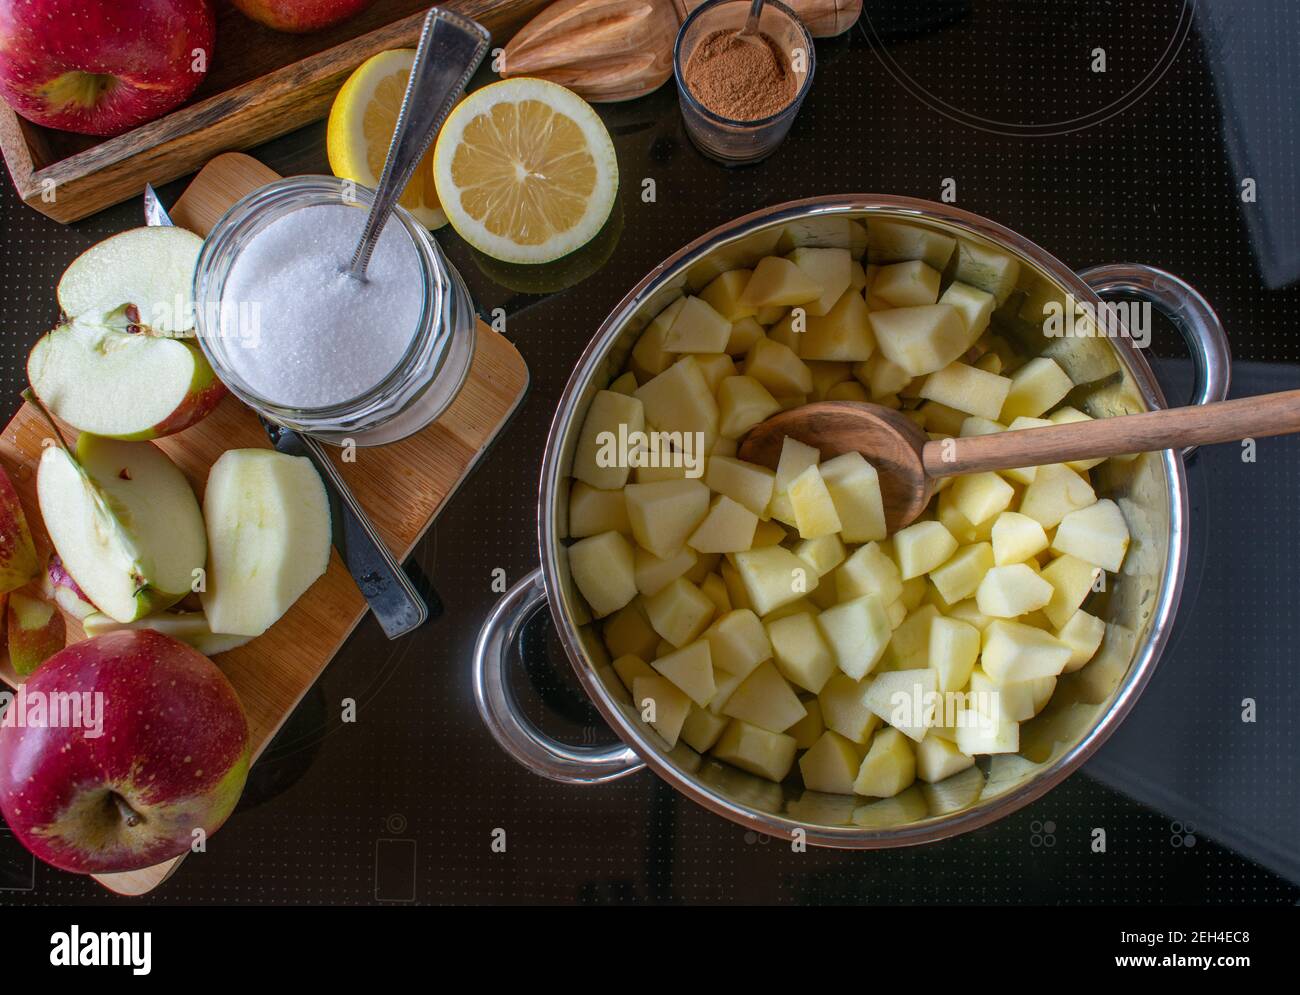 Preparation of apple sauce - Cooking apple compote at home on a stove Stock Photo